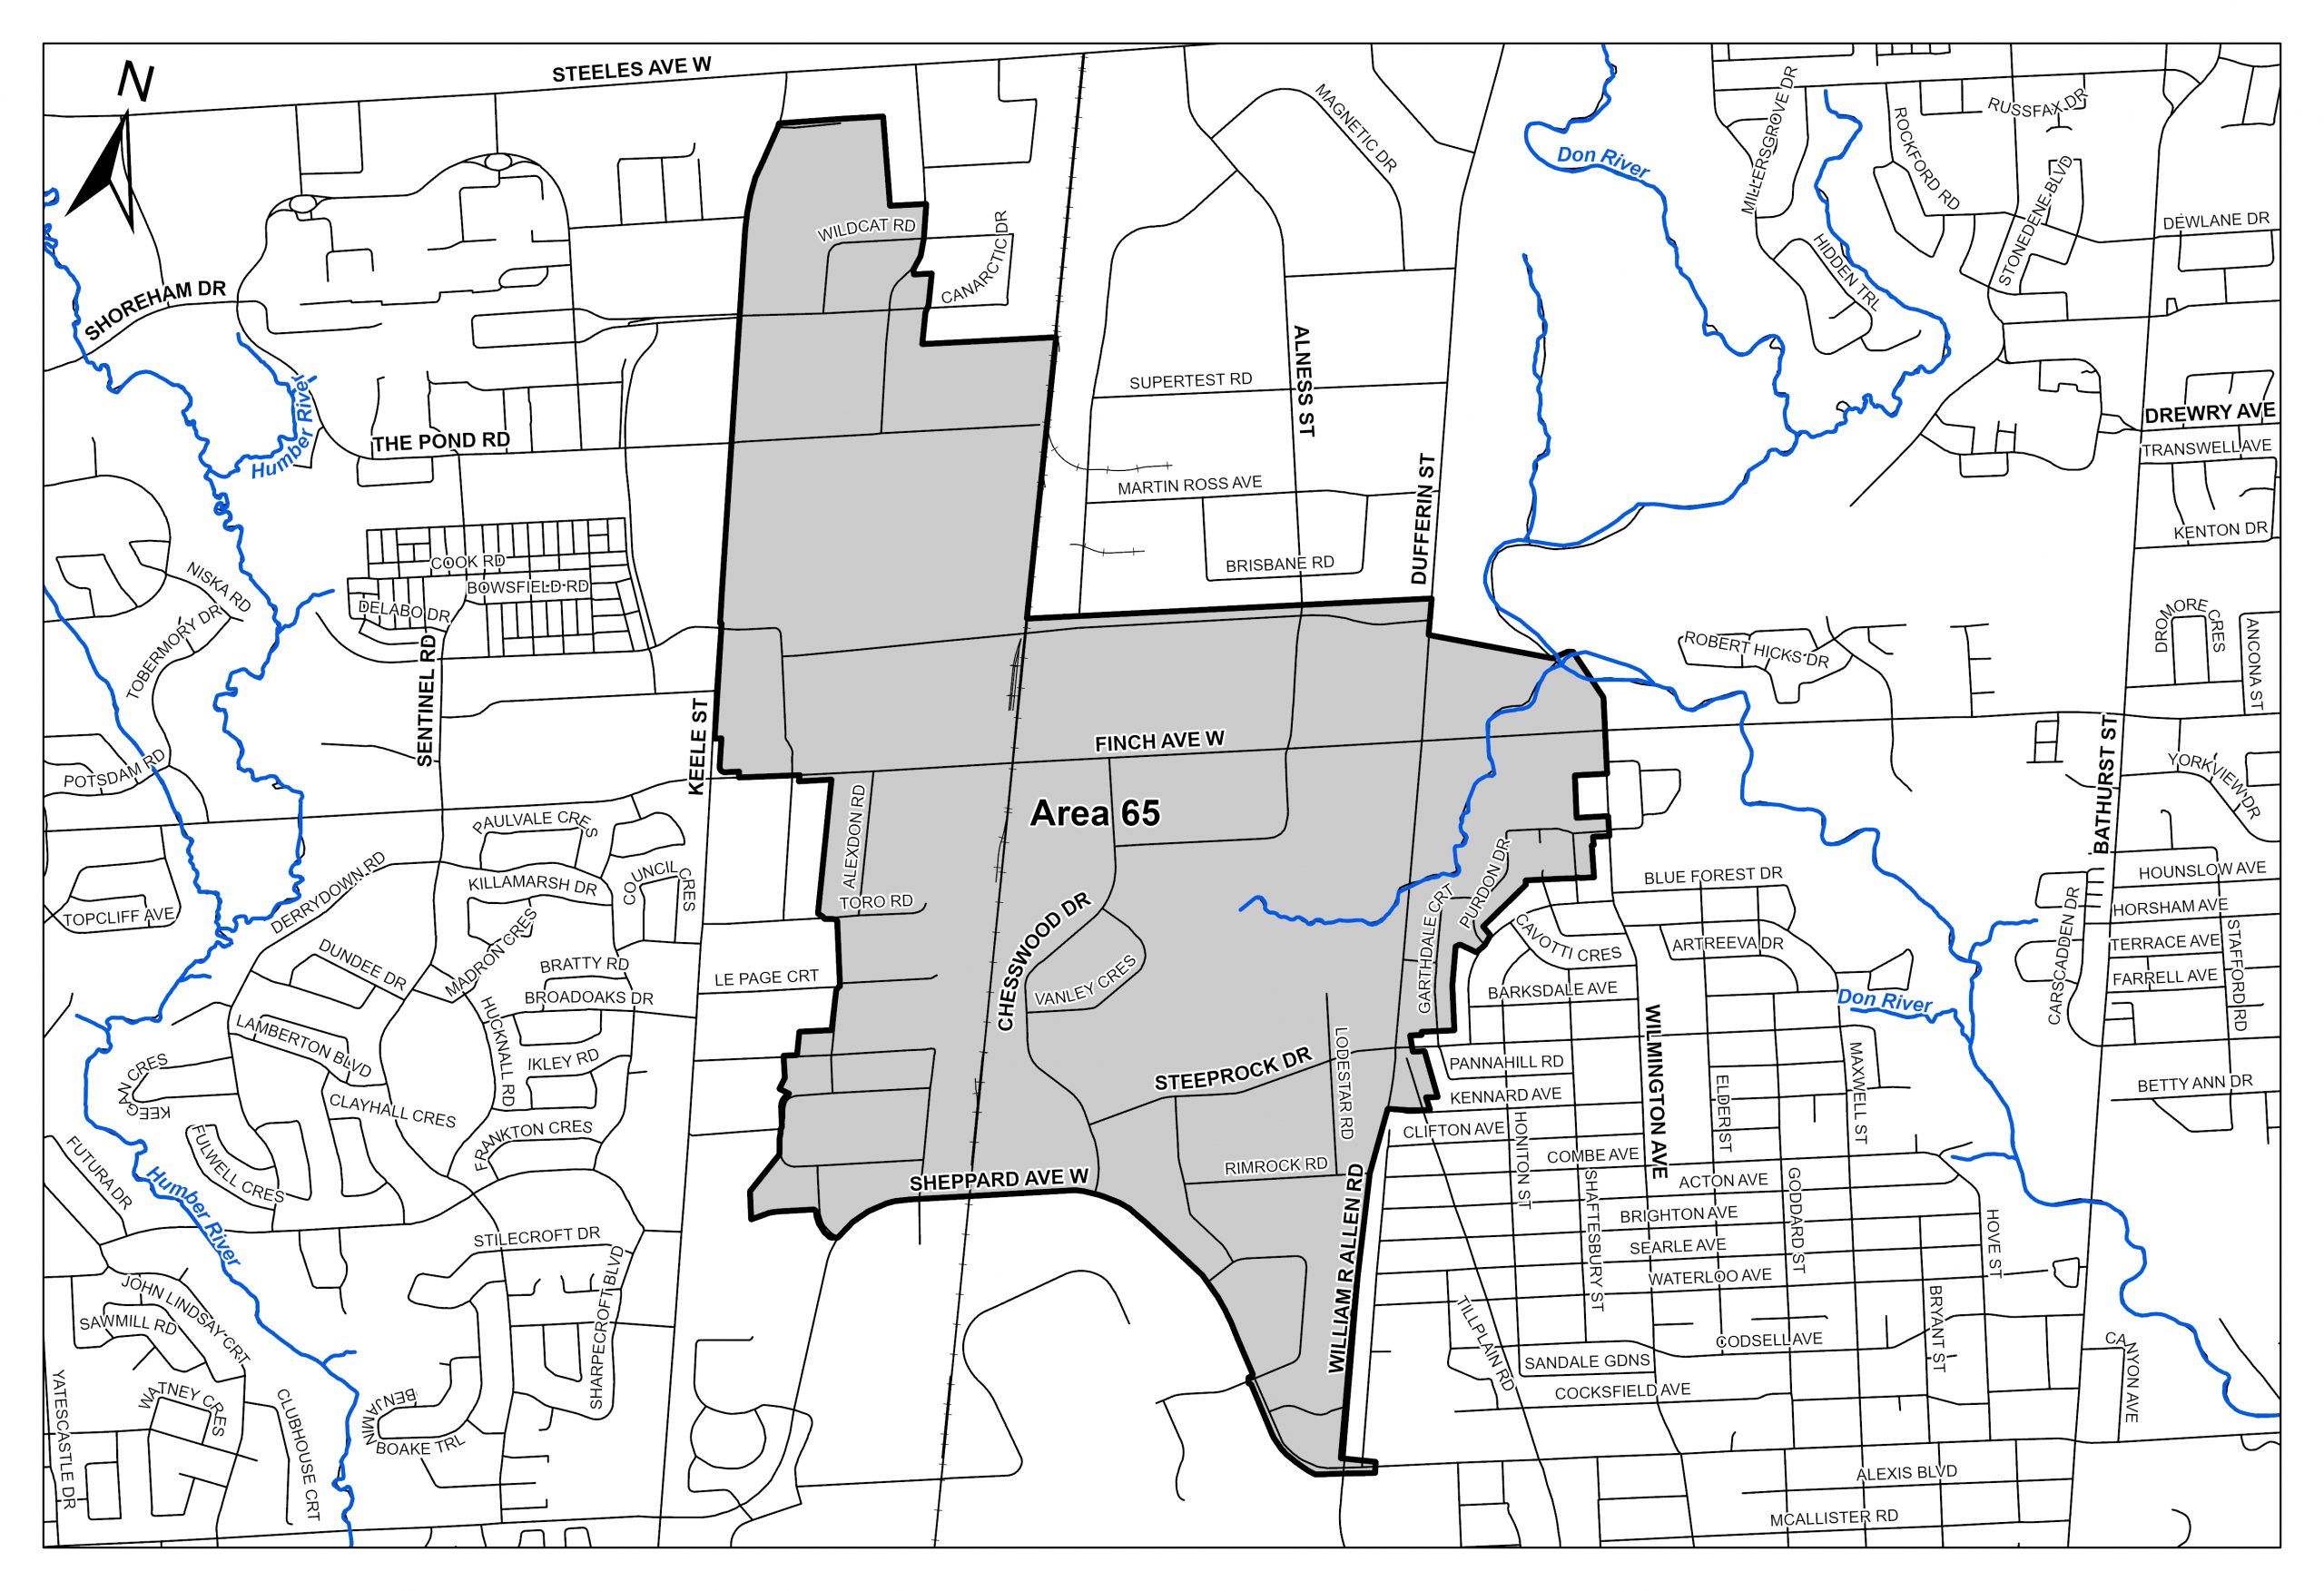 Map of Basement Flooding Study Area 65 from Finch Avenue to Dufferin Avenue to Keele Street. Please contact Mae Lee at mae.lee@toronto.ca or 416-392-8210 for more information.